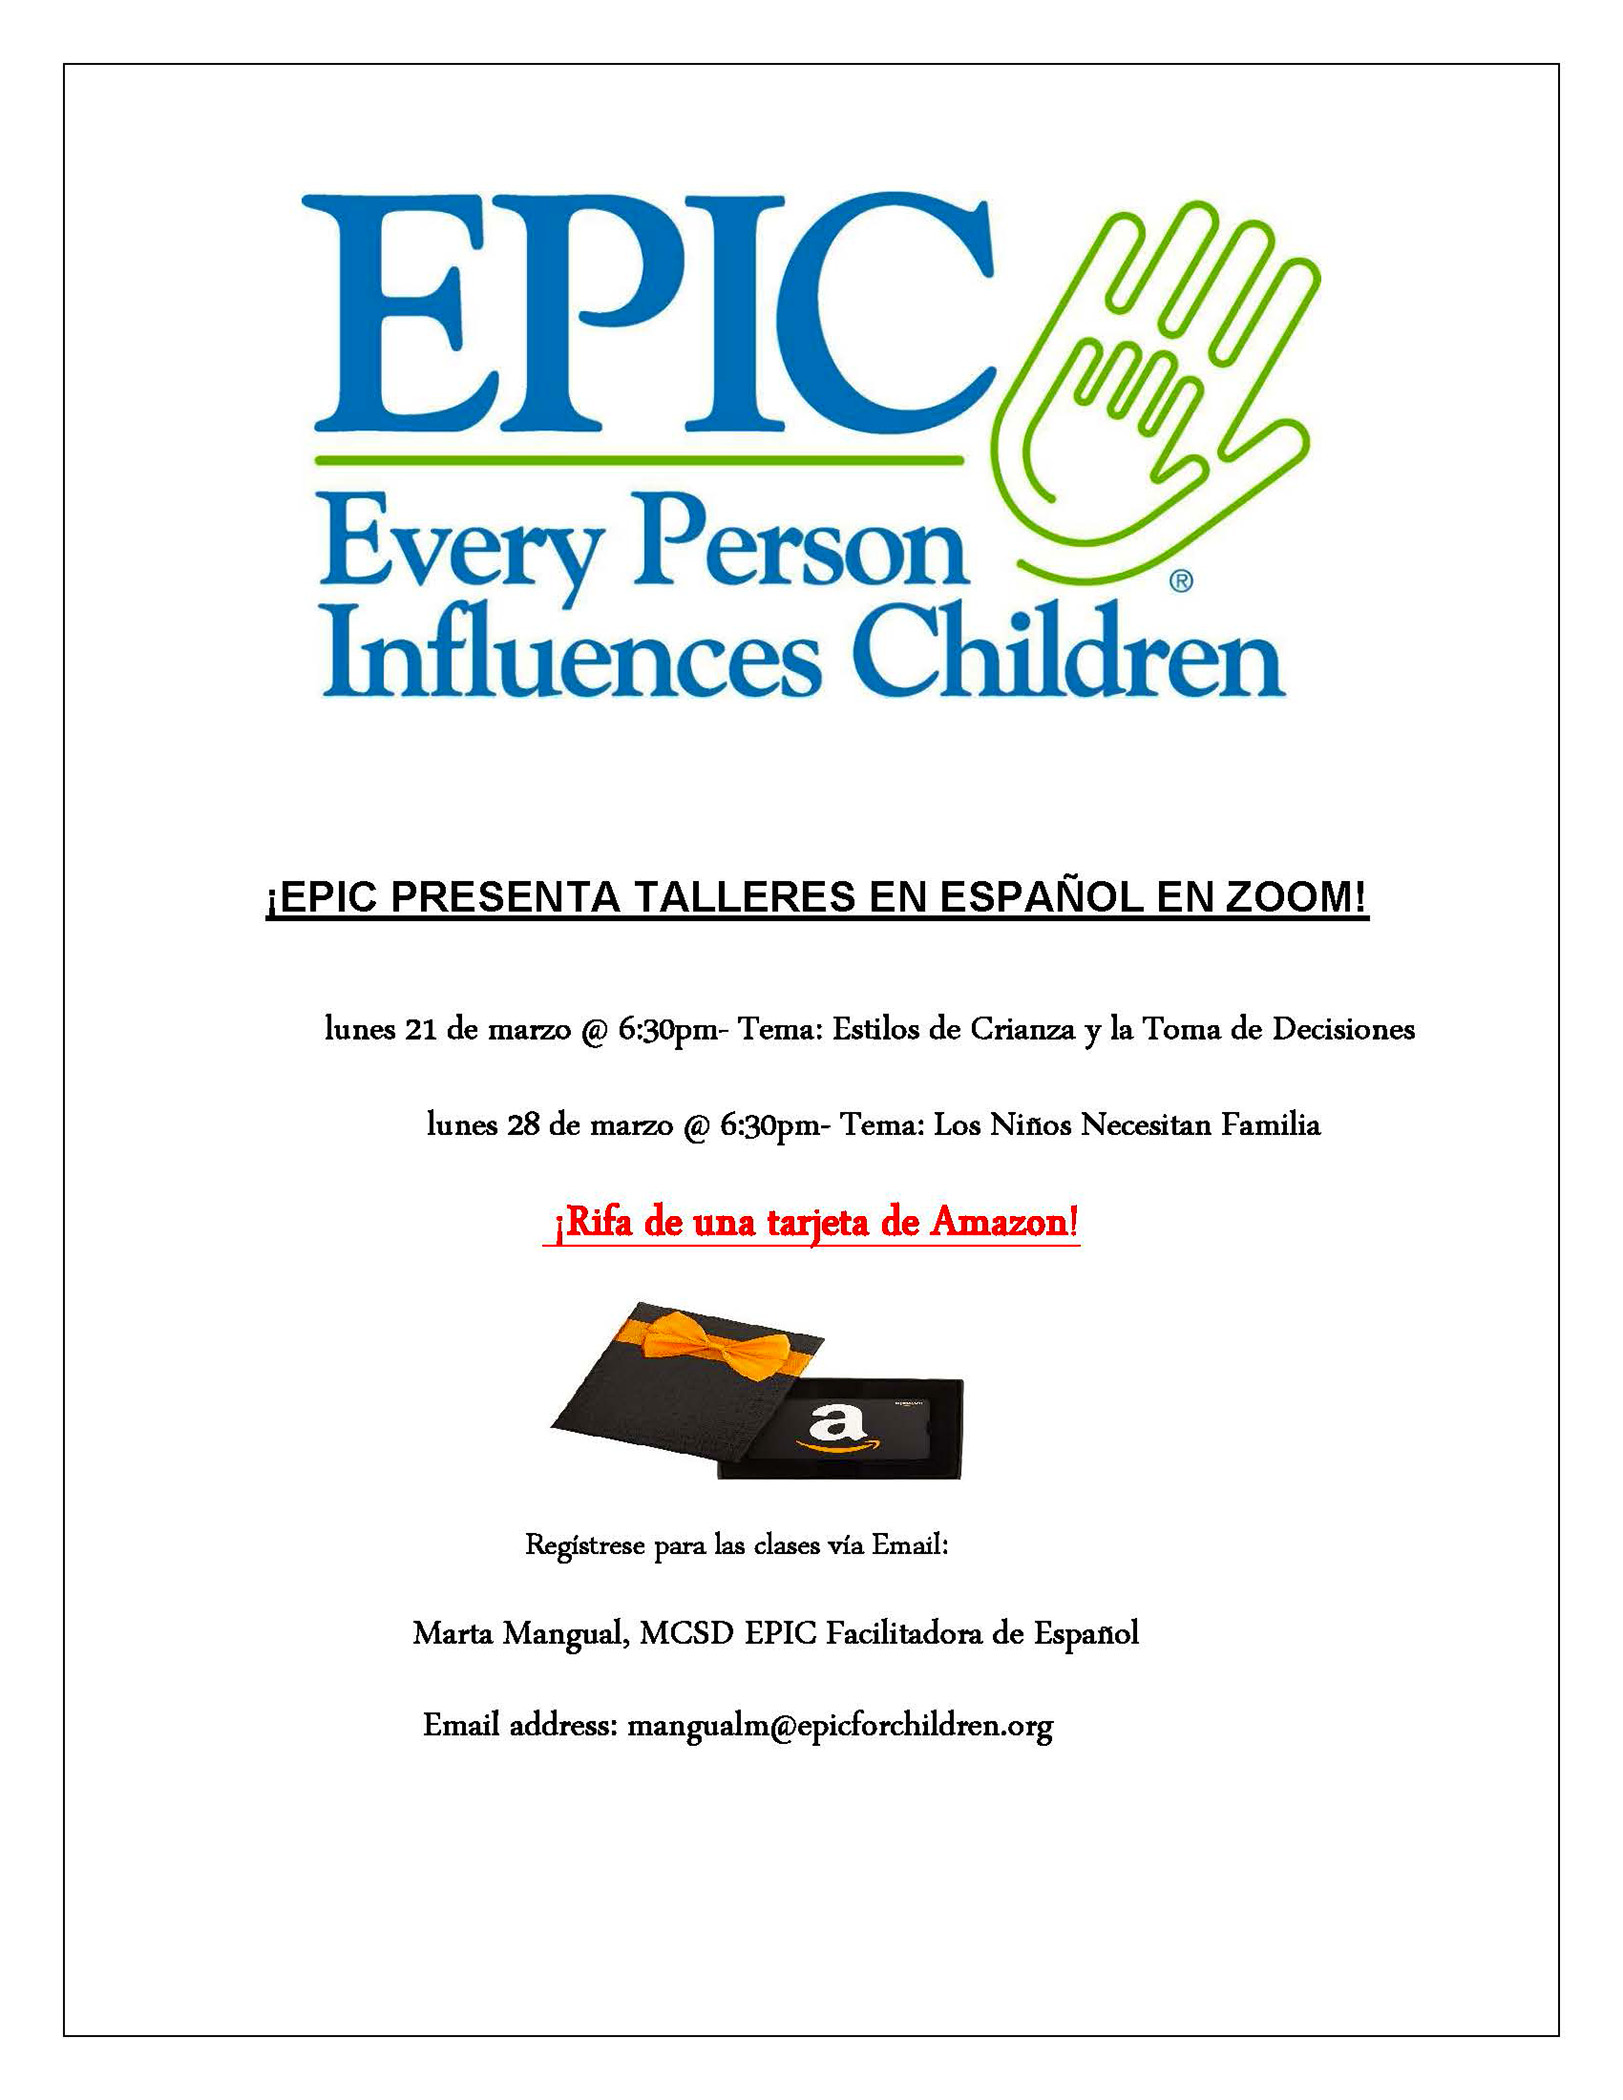 EPIC PRESENTS WORKSHOPS IN SPANISH ON ZOOM! Monday, March 21 @ 6:30pm & Monday, March 28 @ 6:30pm